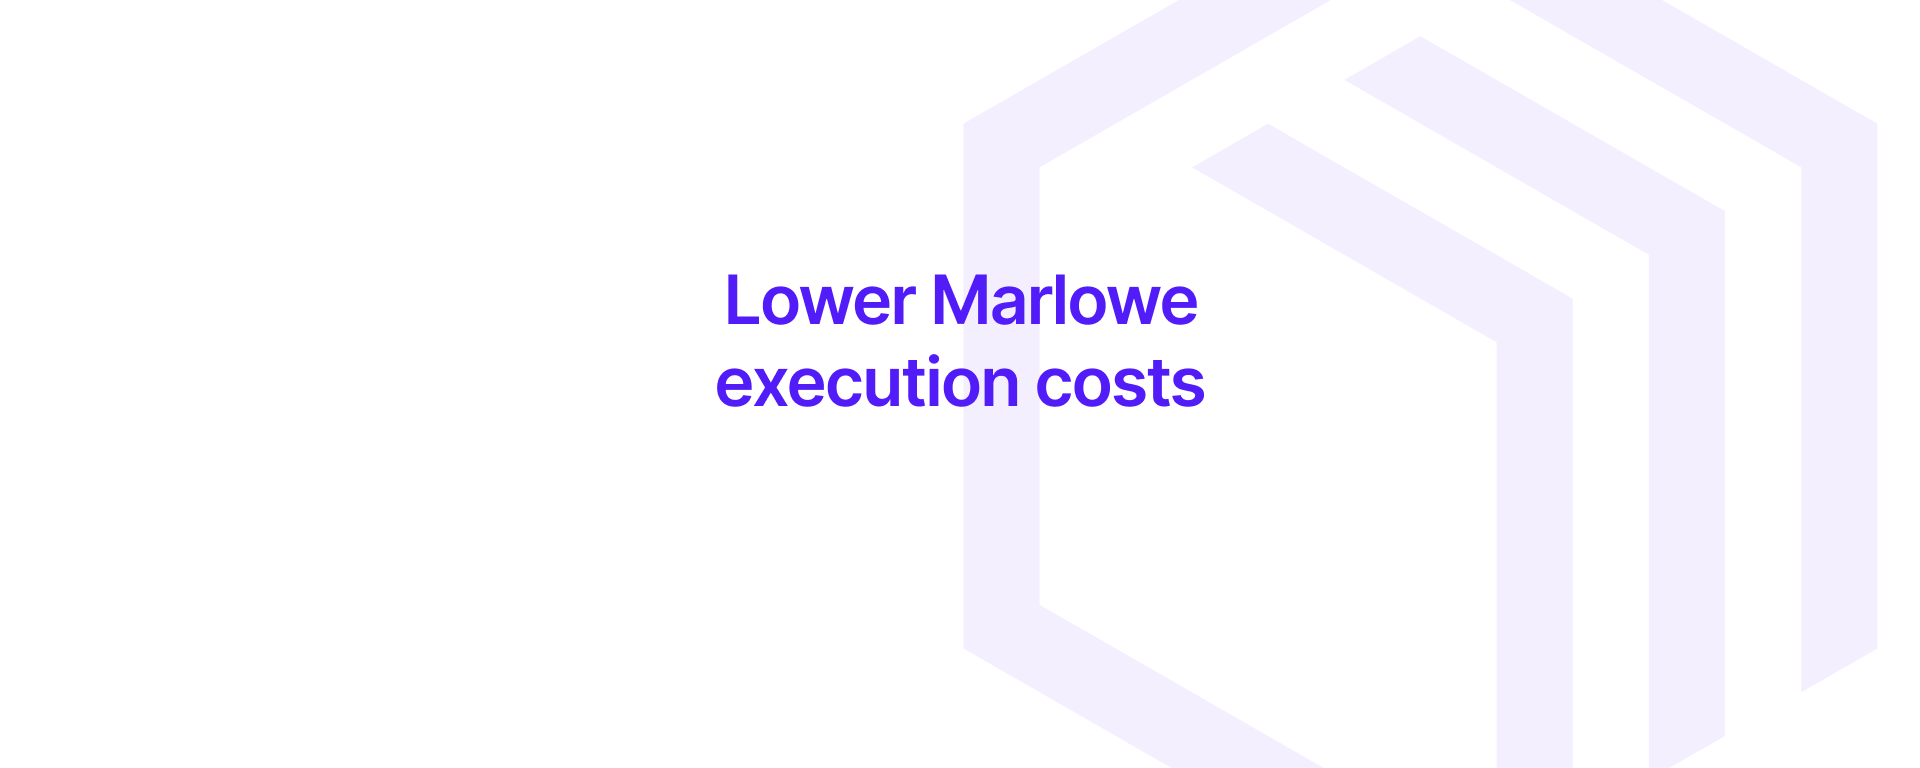 Lower Marlowe execution costs